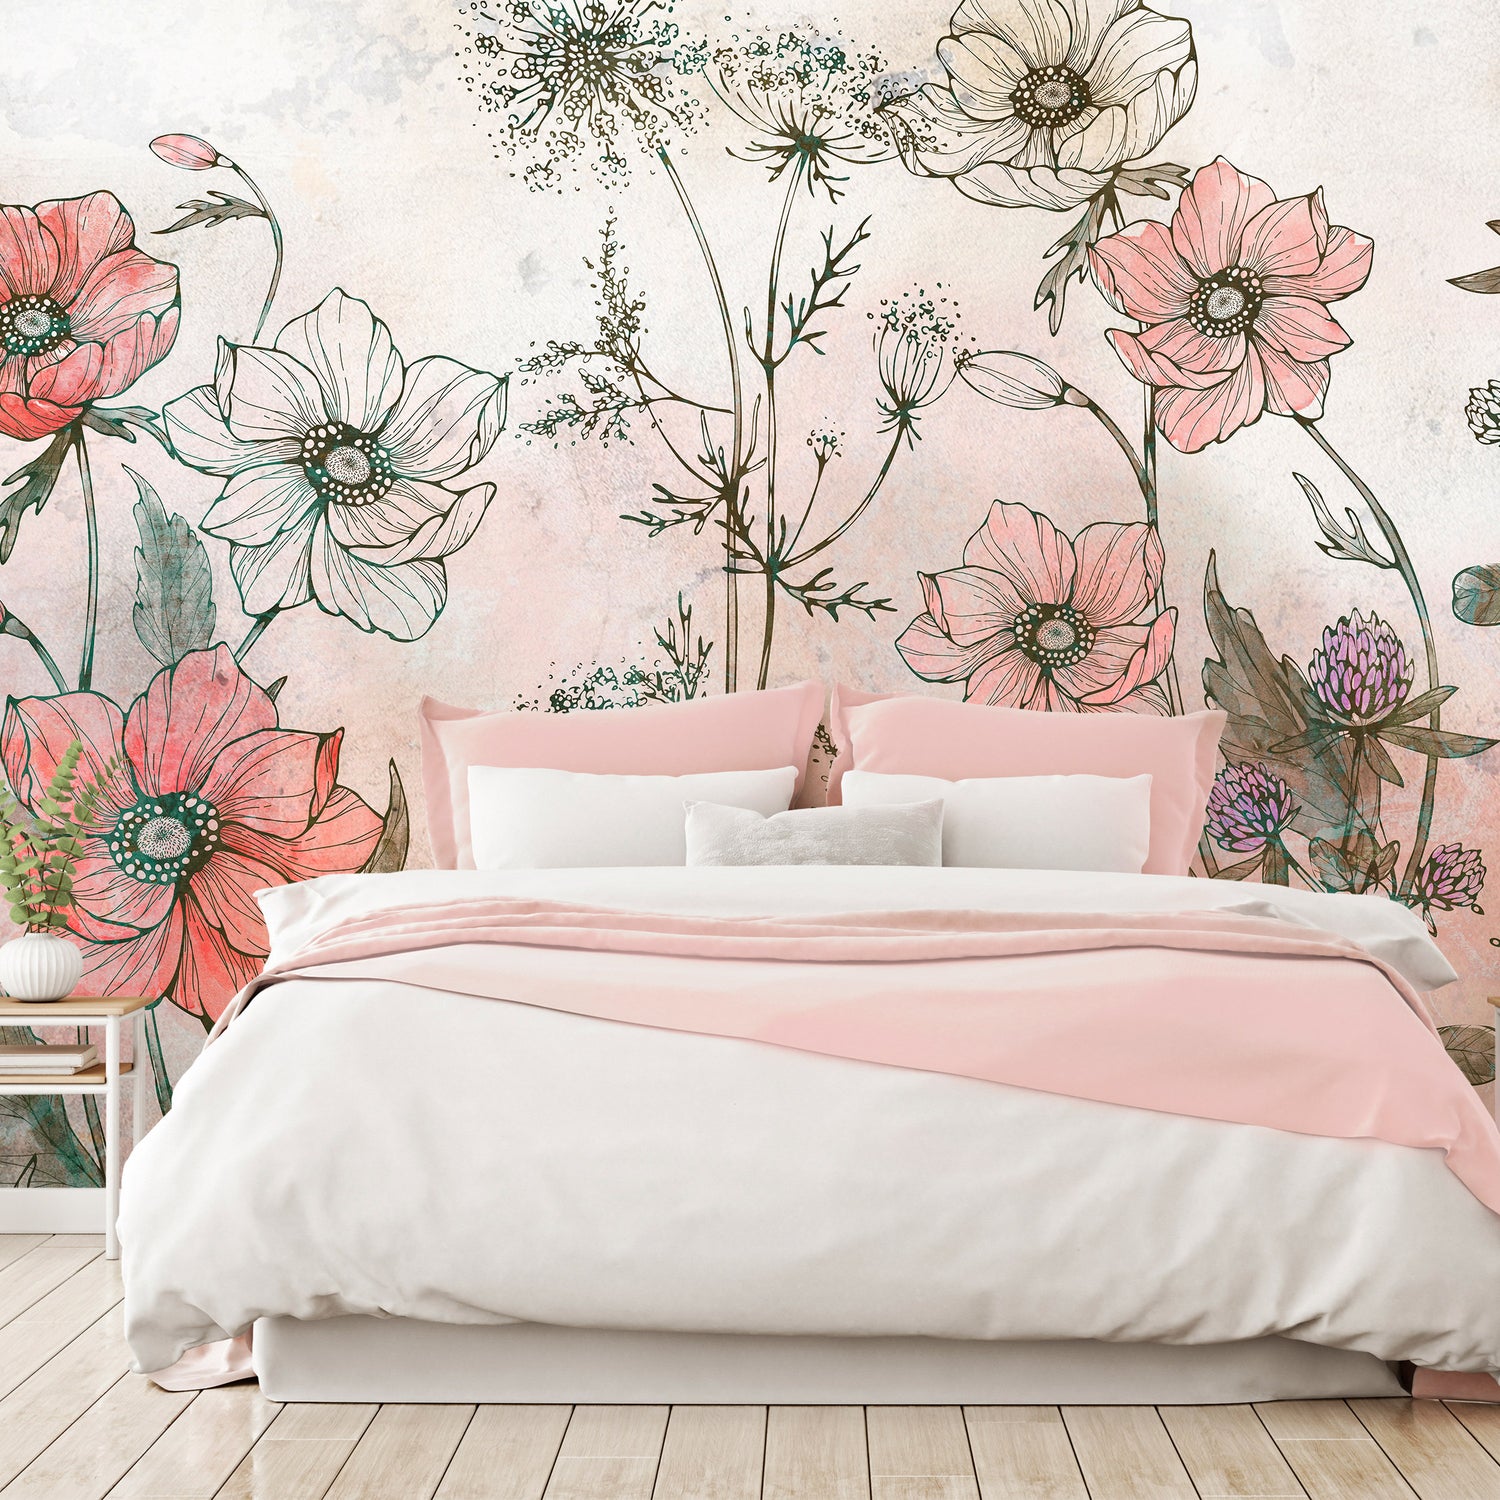 Floral Wallpaper Wall Mural - Day in the Meadow Red